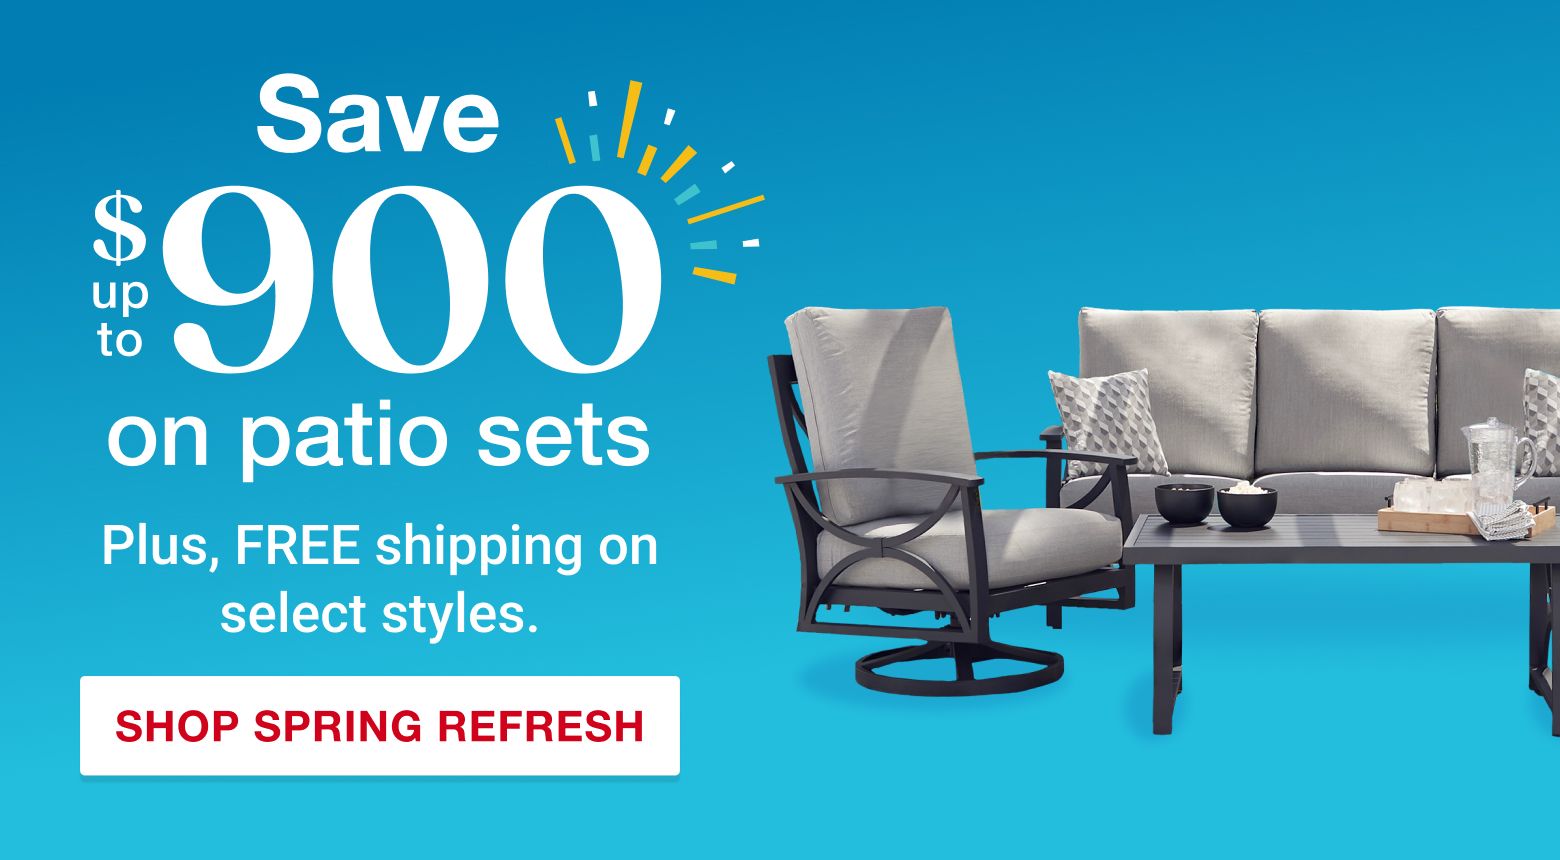 Save up to $900 on patio sets. Plus, free shipping on select styles. Shop spring refresh